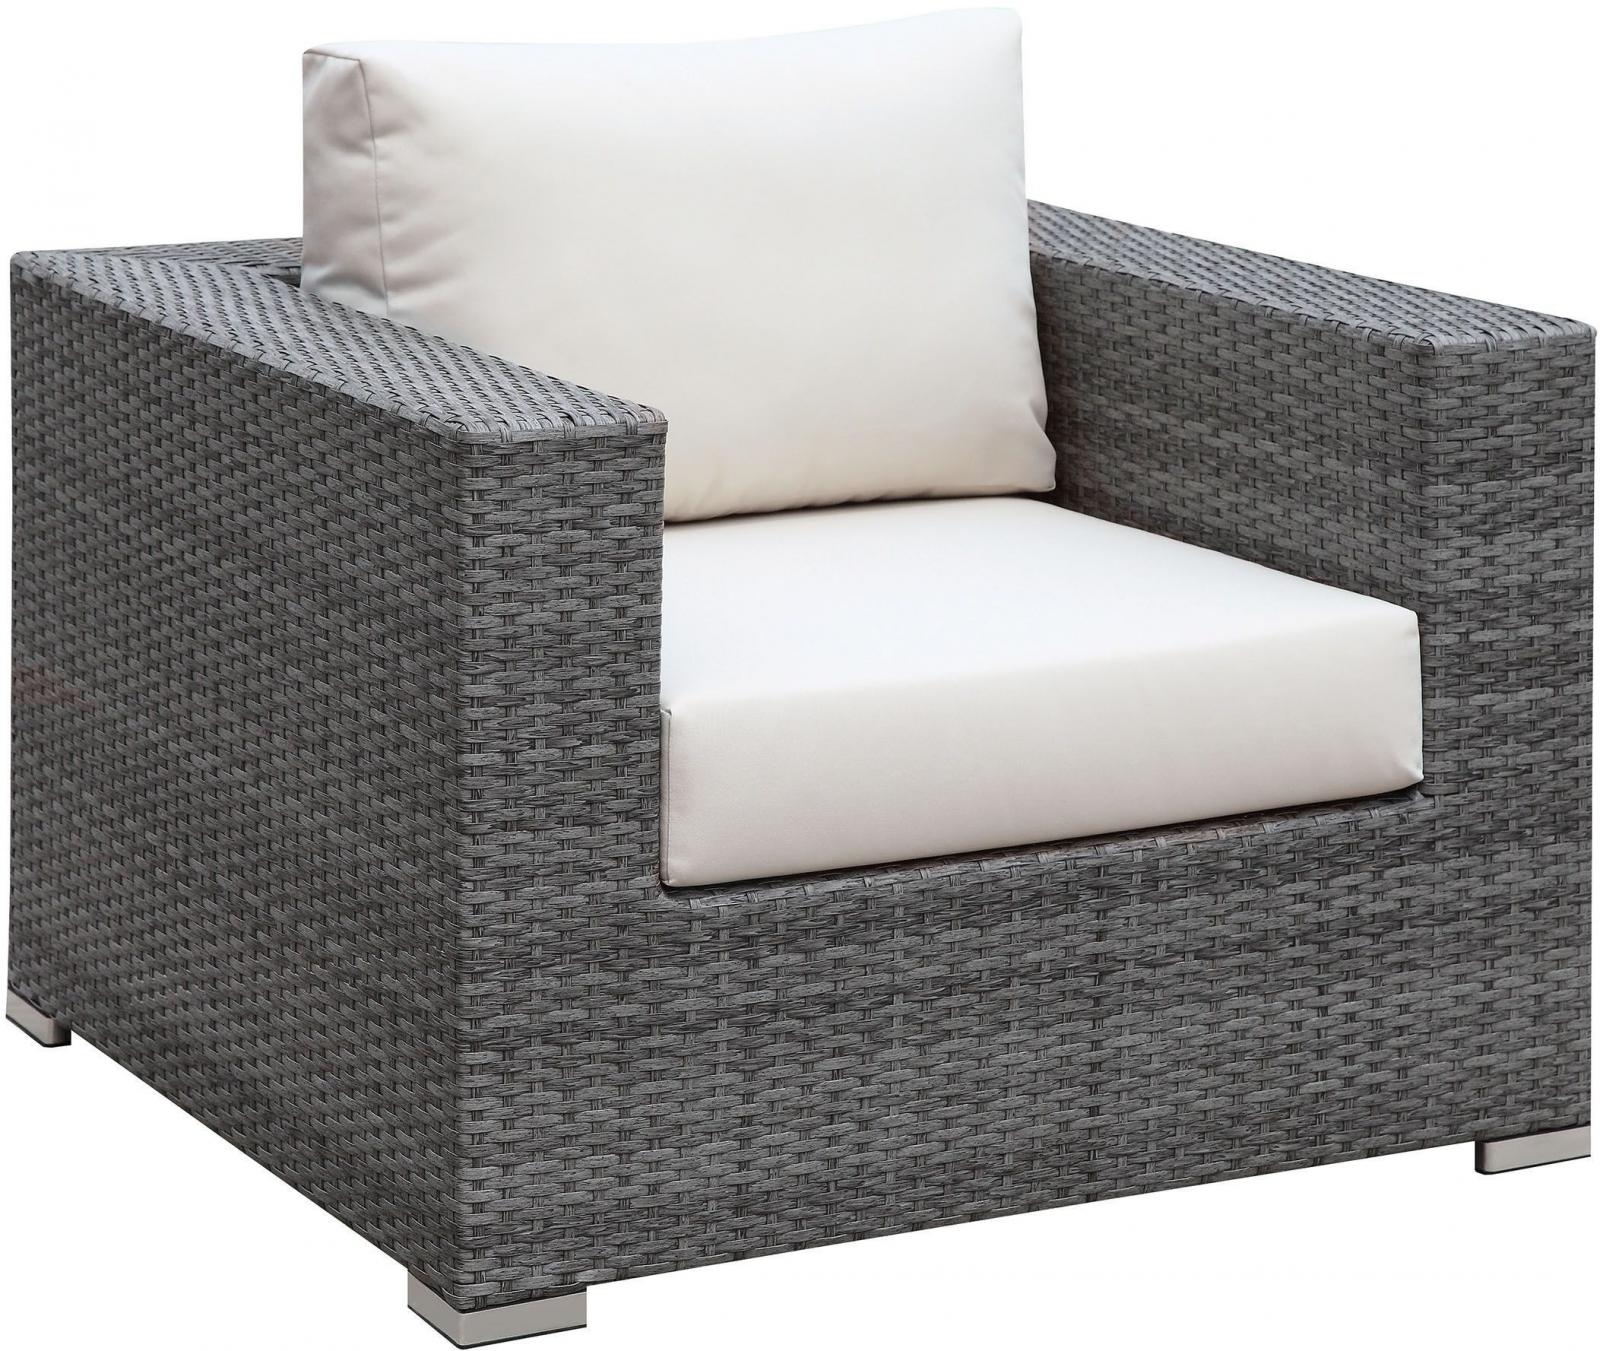 Patio Lounge Chairs W/ End Table Set 3Pcs Furniture of America Somani - image 2 of 3